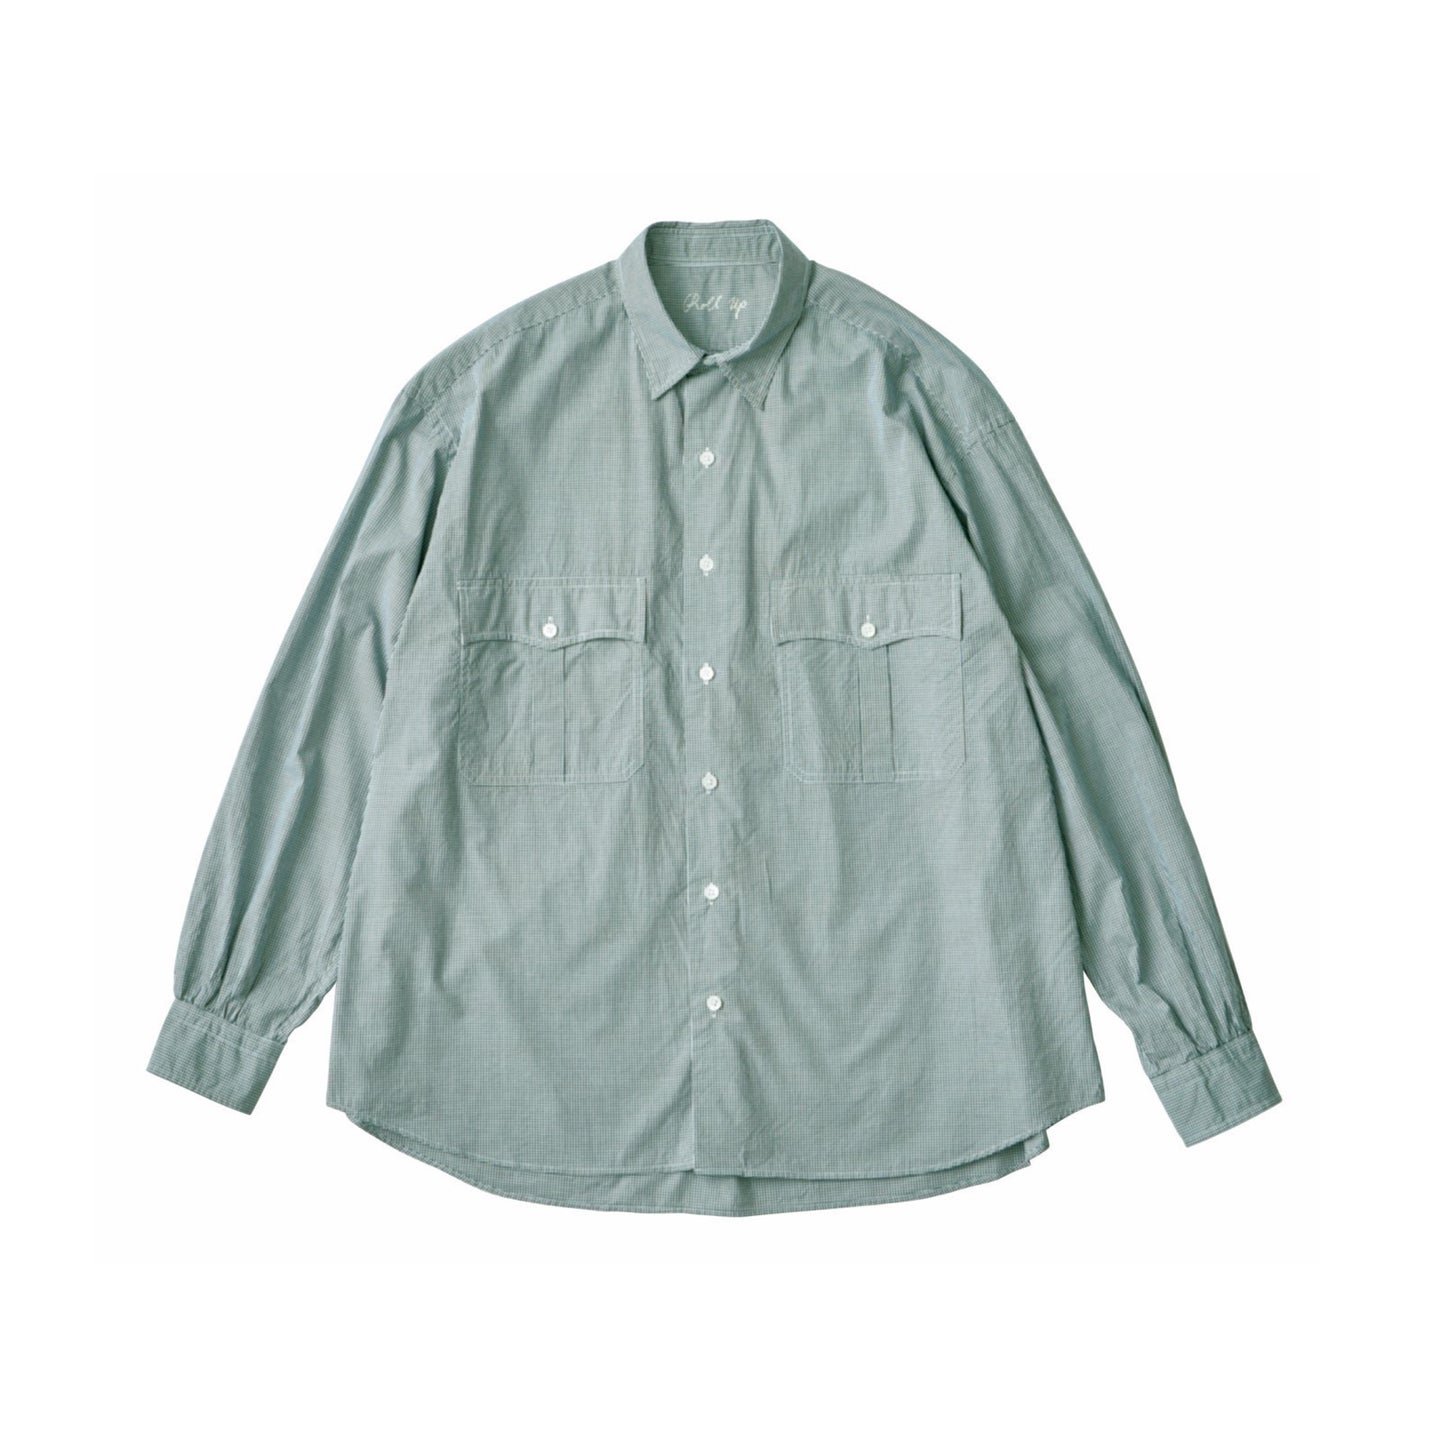 ROLL UP NEW GINGHAM CHECK SHIRT